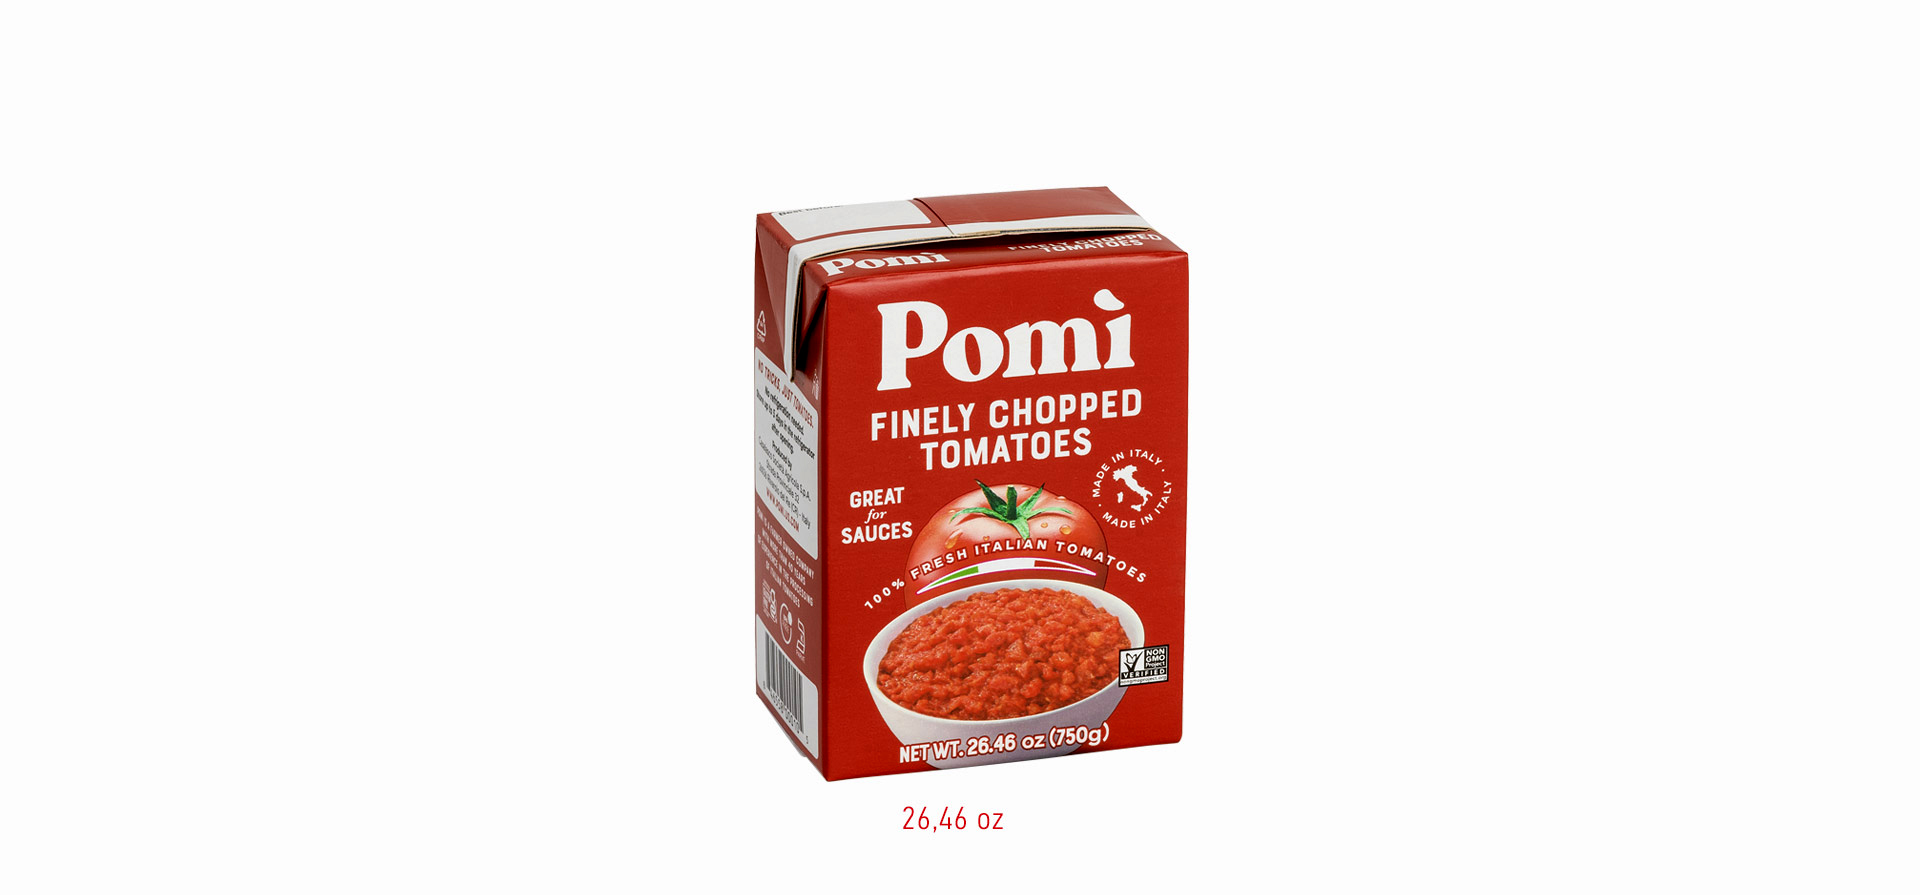 Finely chopped tomatoes